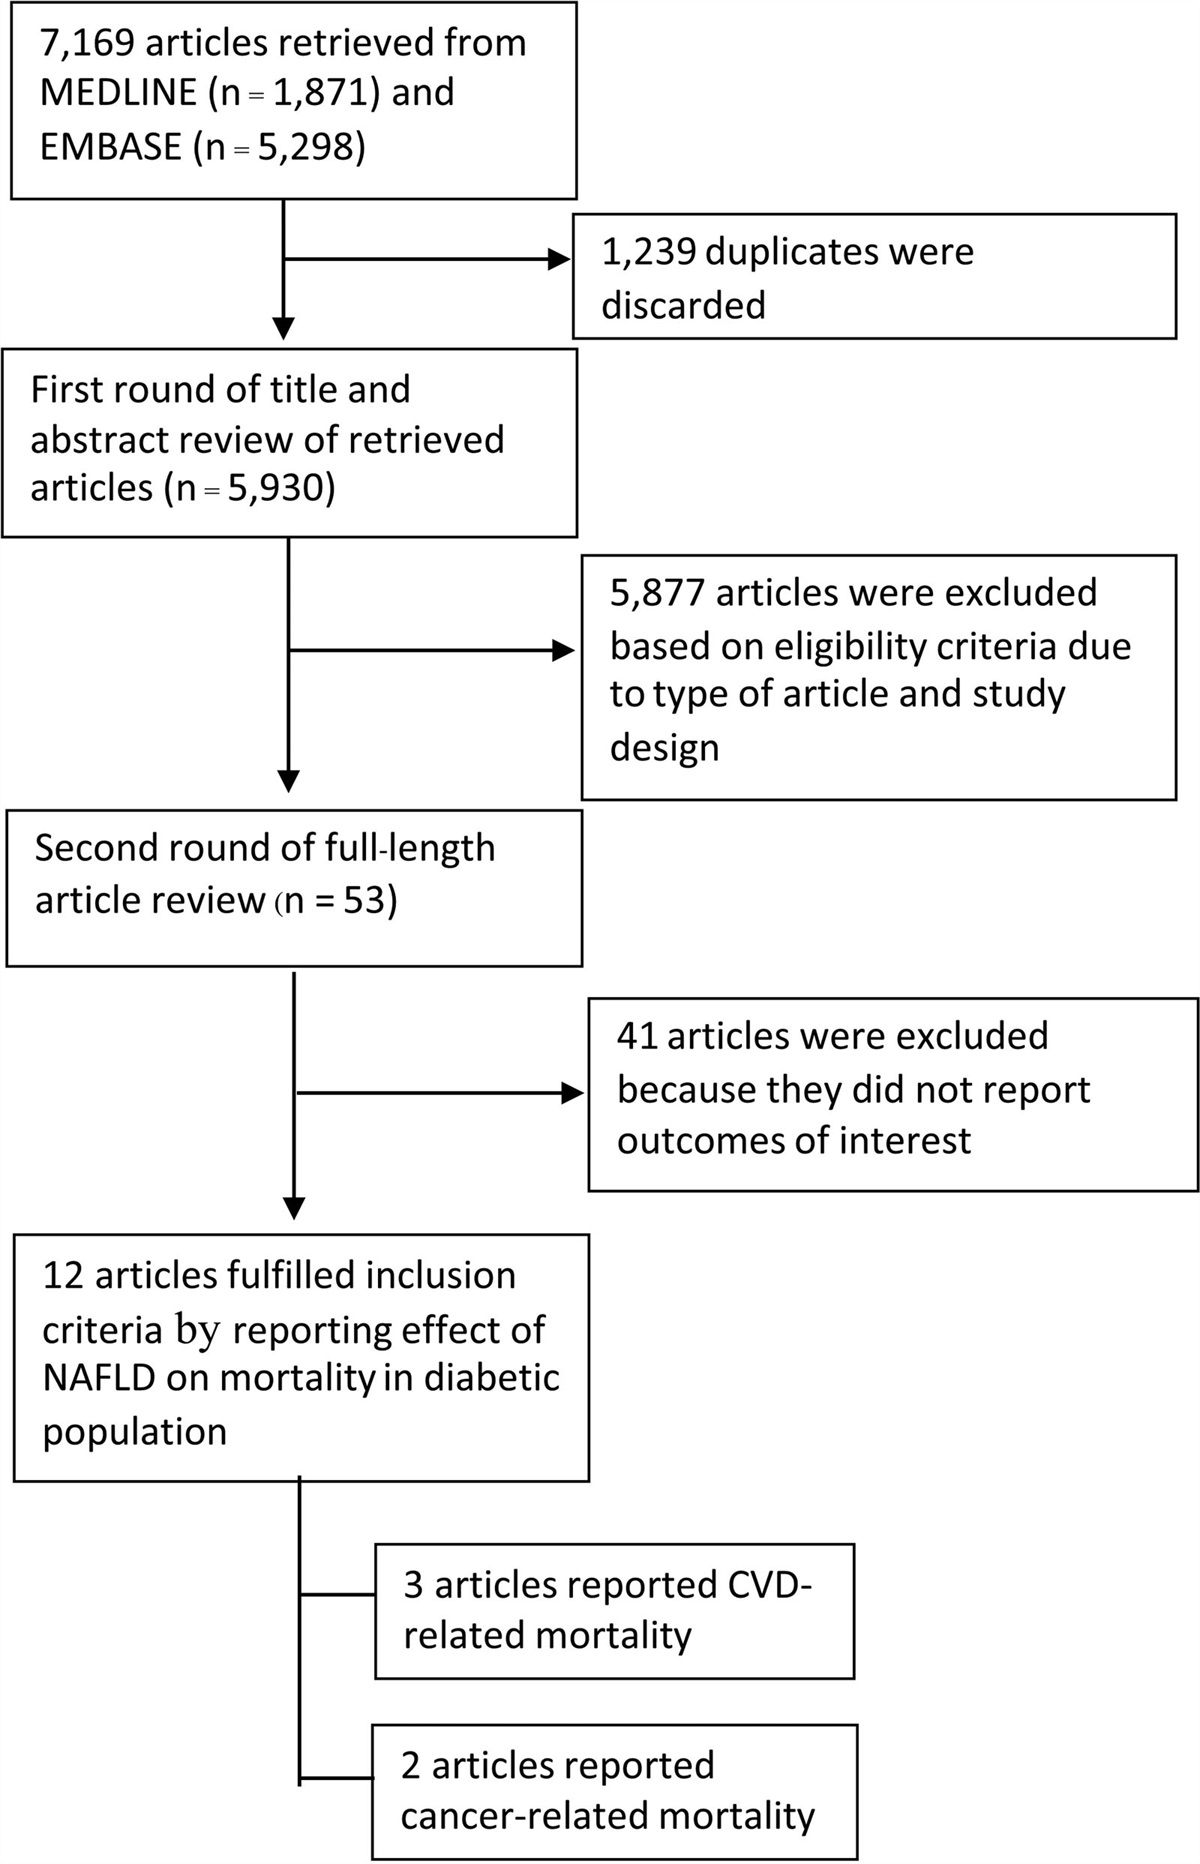 Metabolic dysfunction-associated steatotic liver disease and the risk of mortality in individuals with type 2 diabetes: a systematic review and meta-analysis